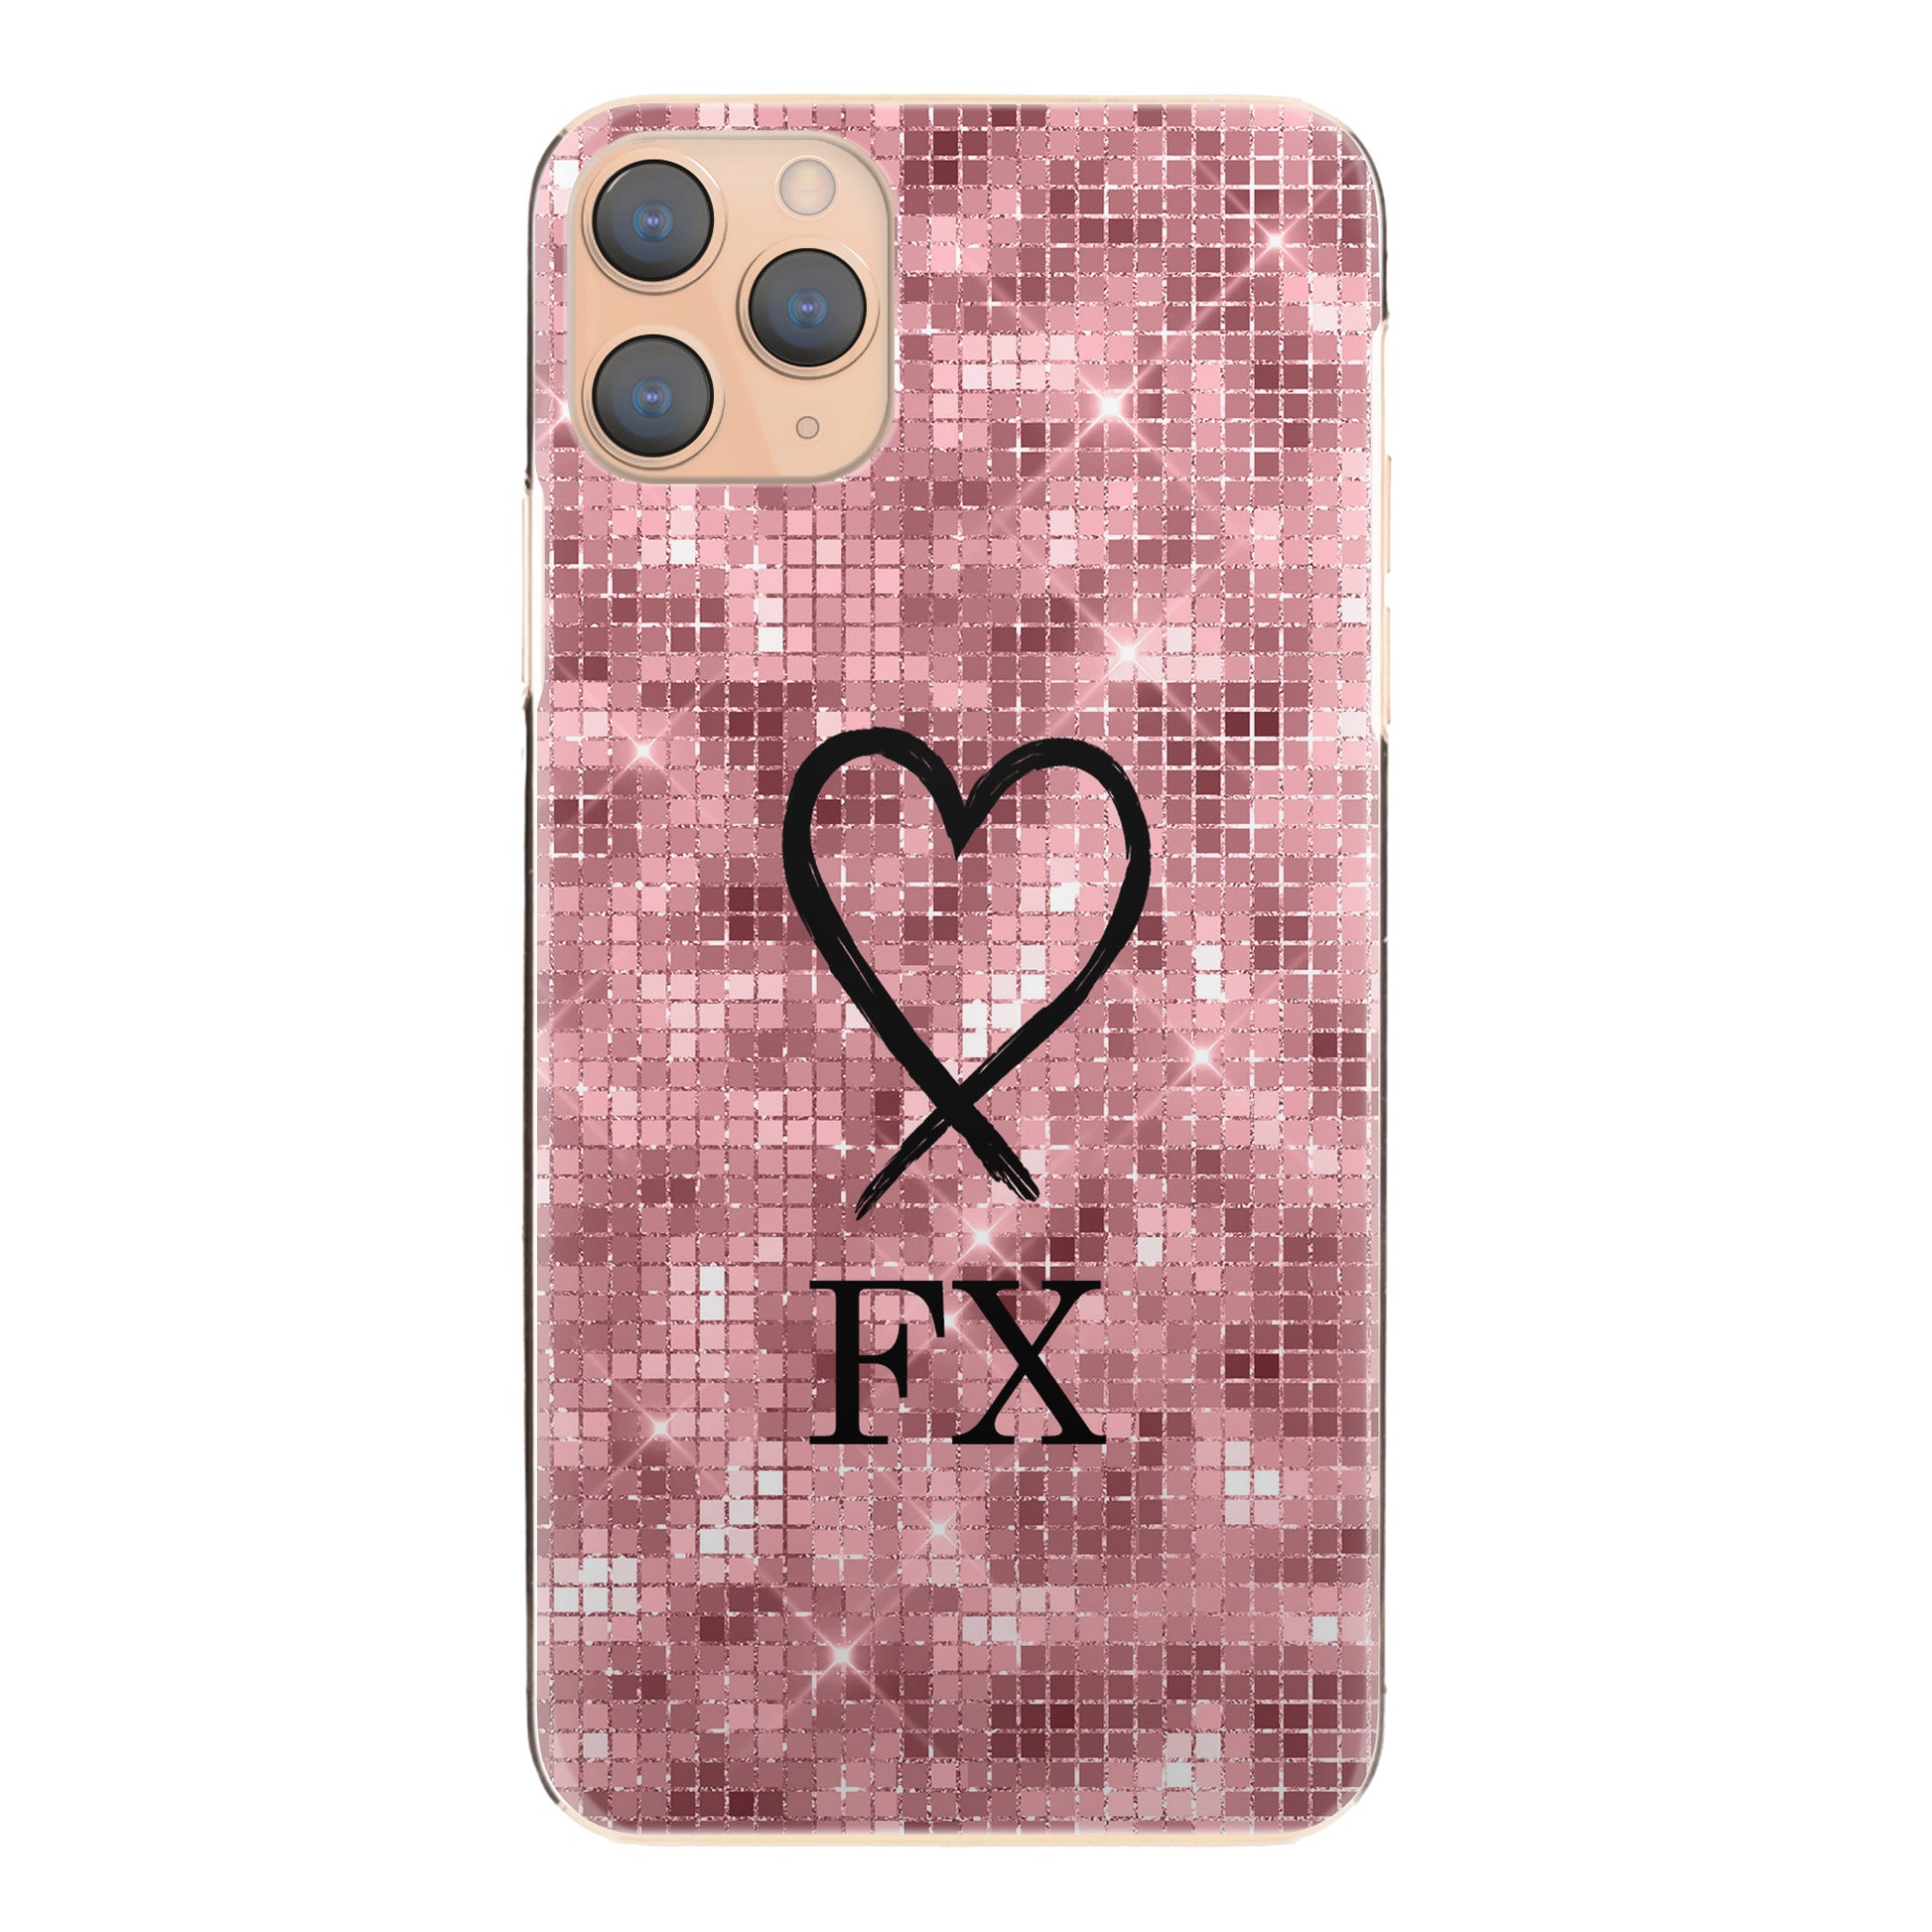 Personalised HTC Phone Hard Case with Heart Sketch and Initials on Pink Disco Ball